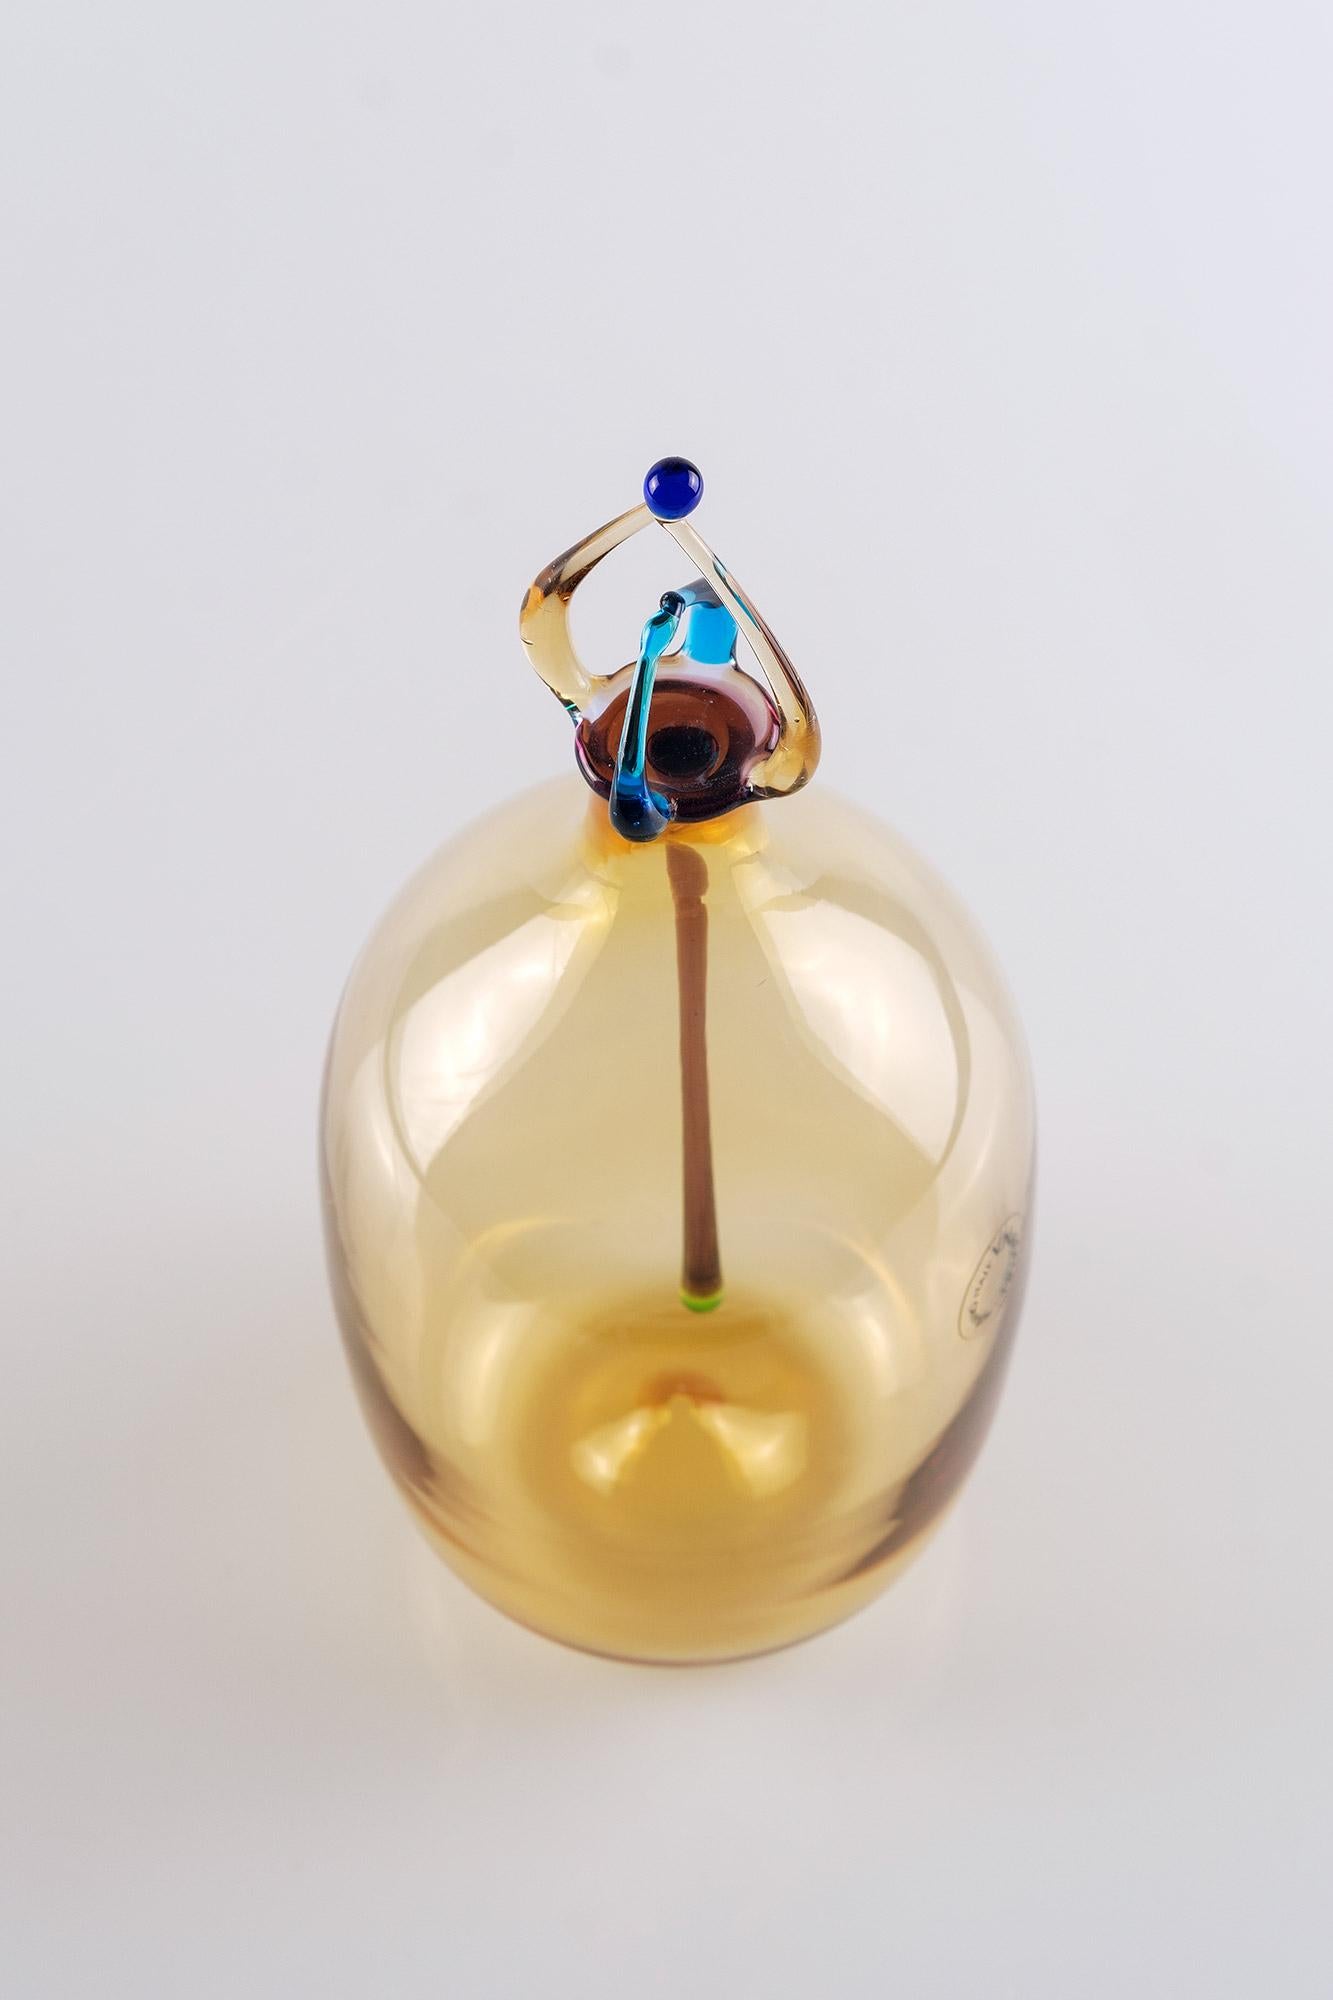 Beautiful colourful perfume bottle made of mouth blown yellow Murano glassy Vincenzo Nason.
The design is inspired by the Memphis Group of the 1980's early 1990's.
Signed V. Nason near the base of the bottle.